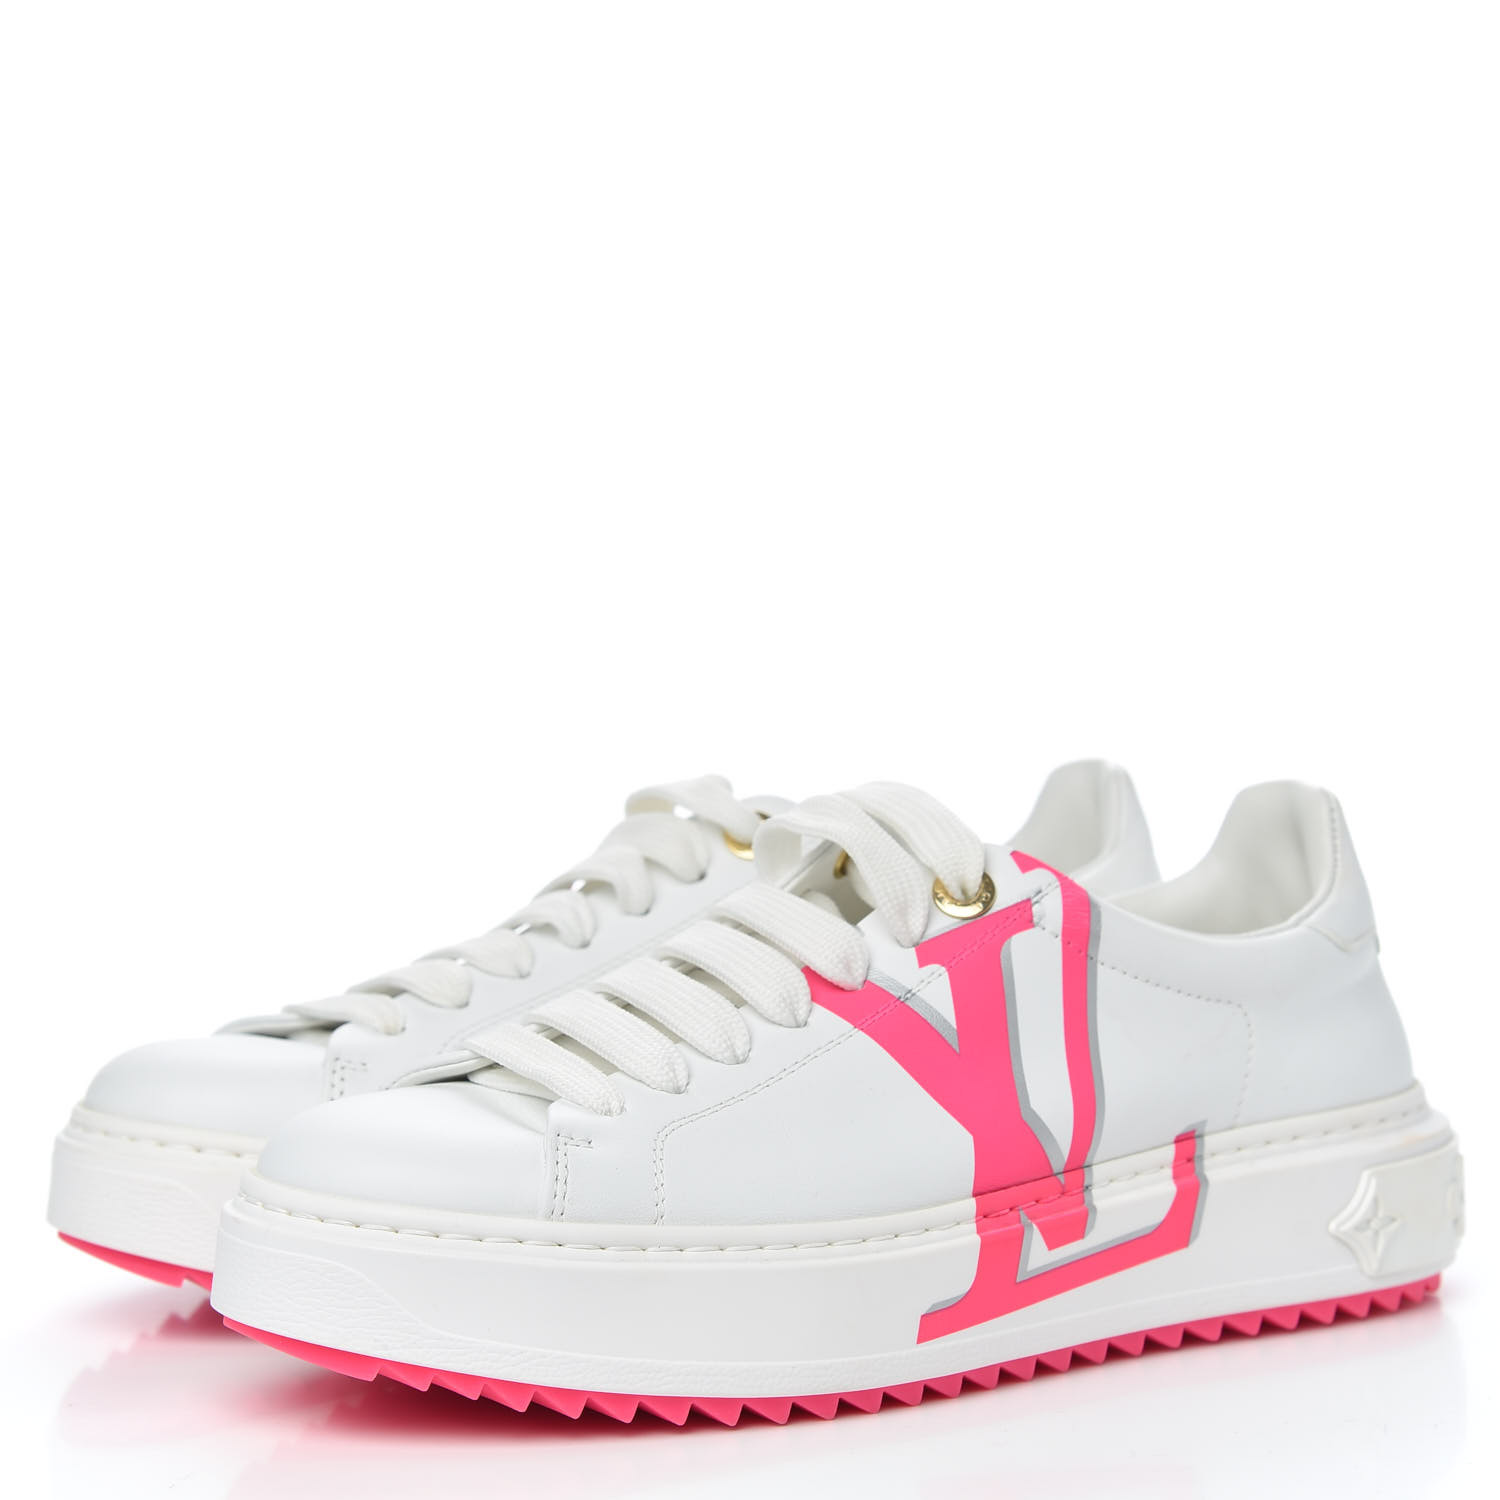 LOUIS VUITTON Monogram Time Out Sneakers 37.5 White Rose 738494 ...